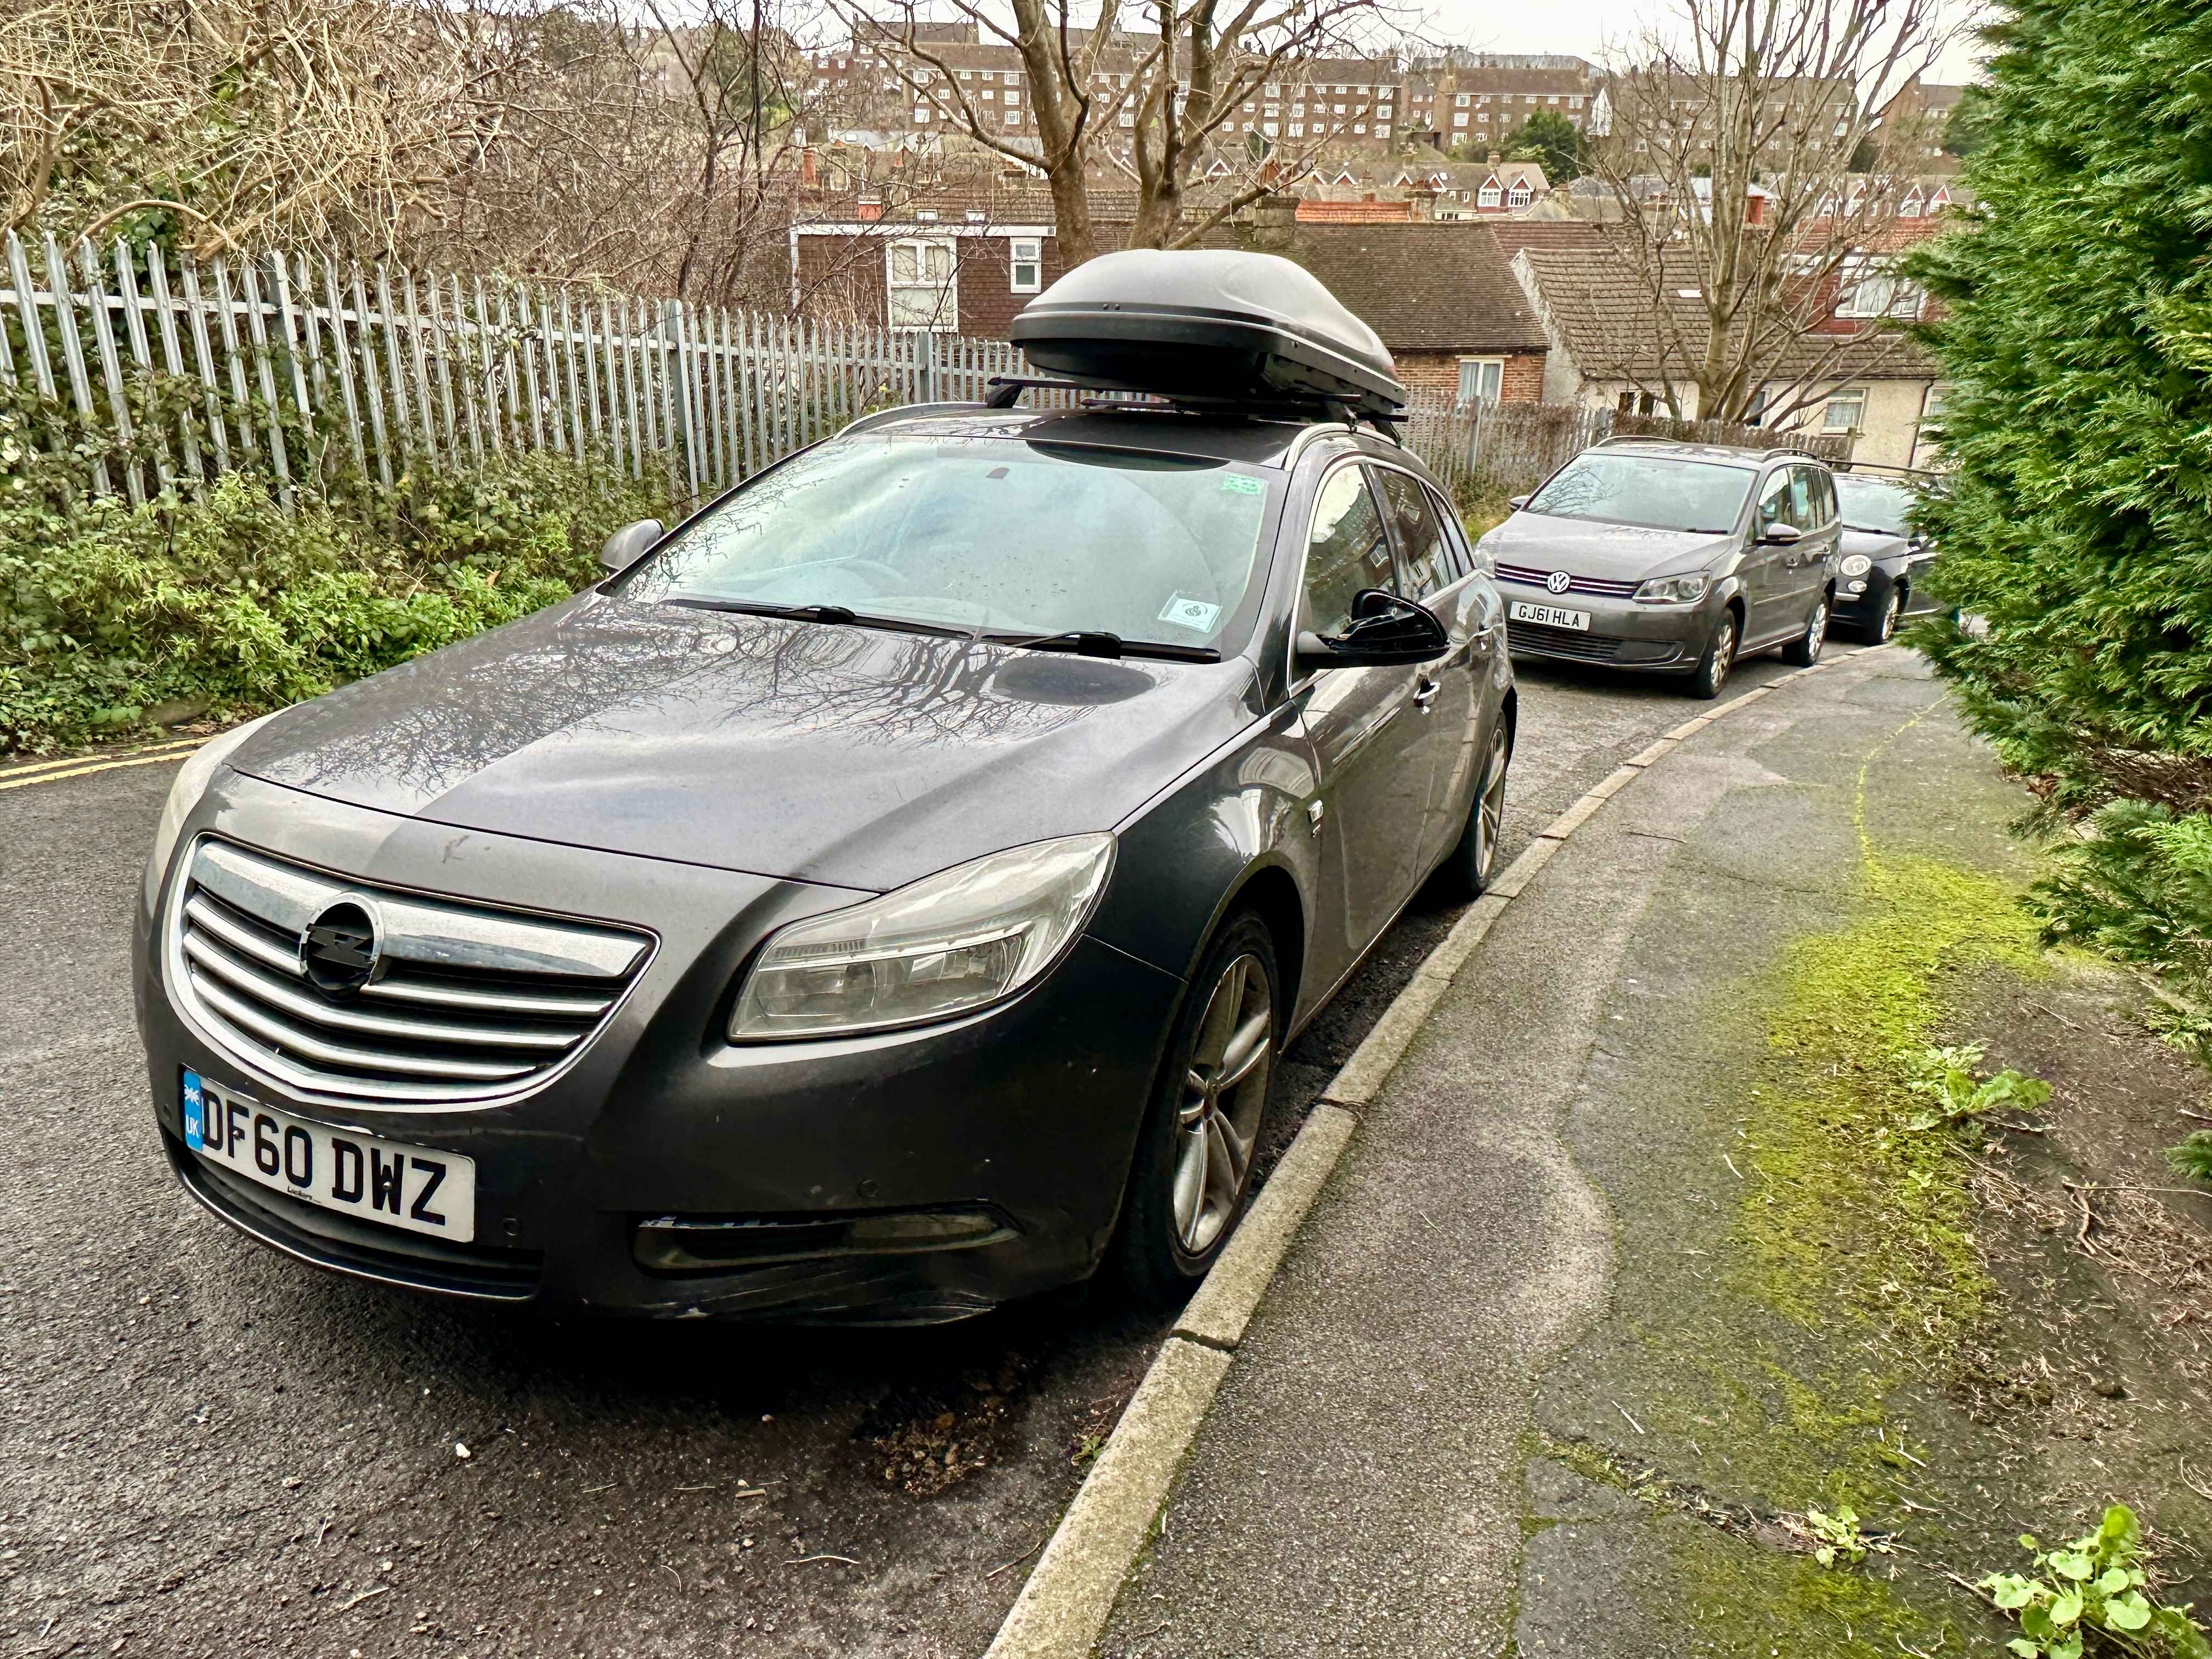 Photograph of DF60 DWZ - a Grey Vauxhall Insignia parked in Hollingdean by a non-resident. The eighth of nine photographs supplied by the residents of Hollingdean.